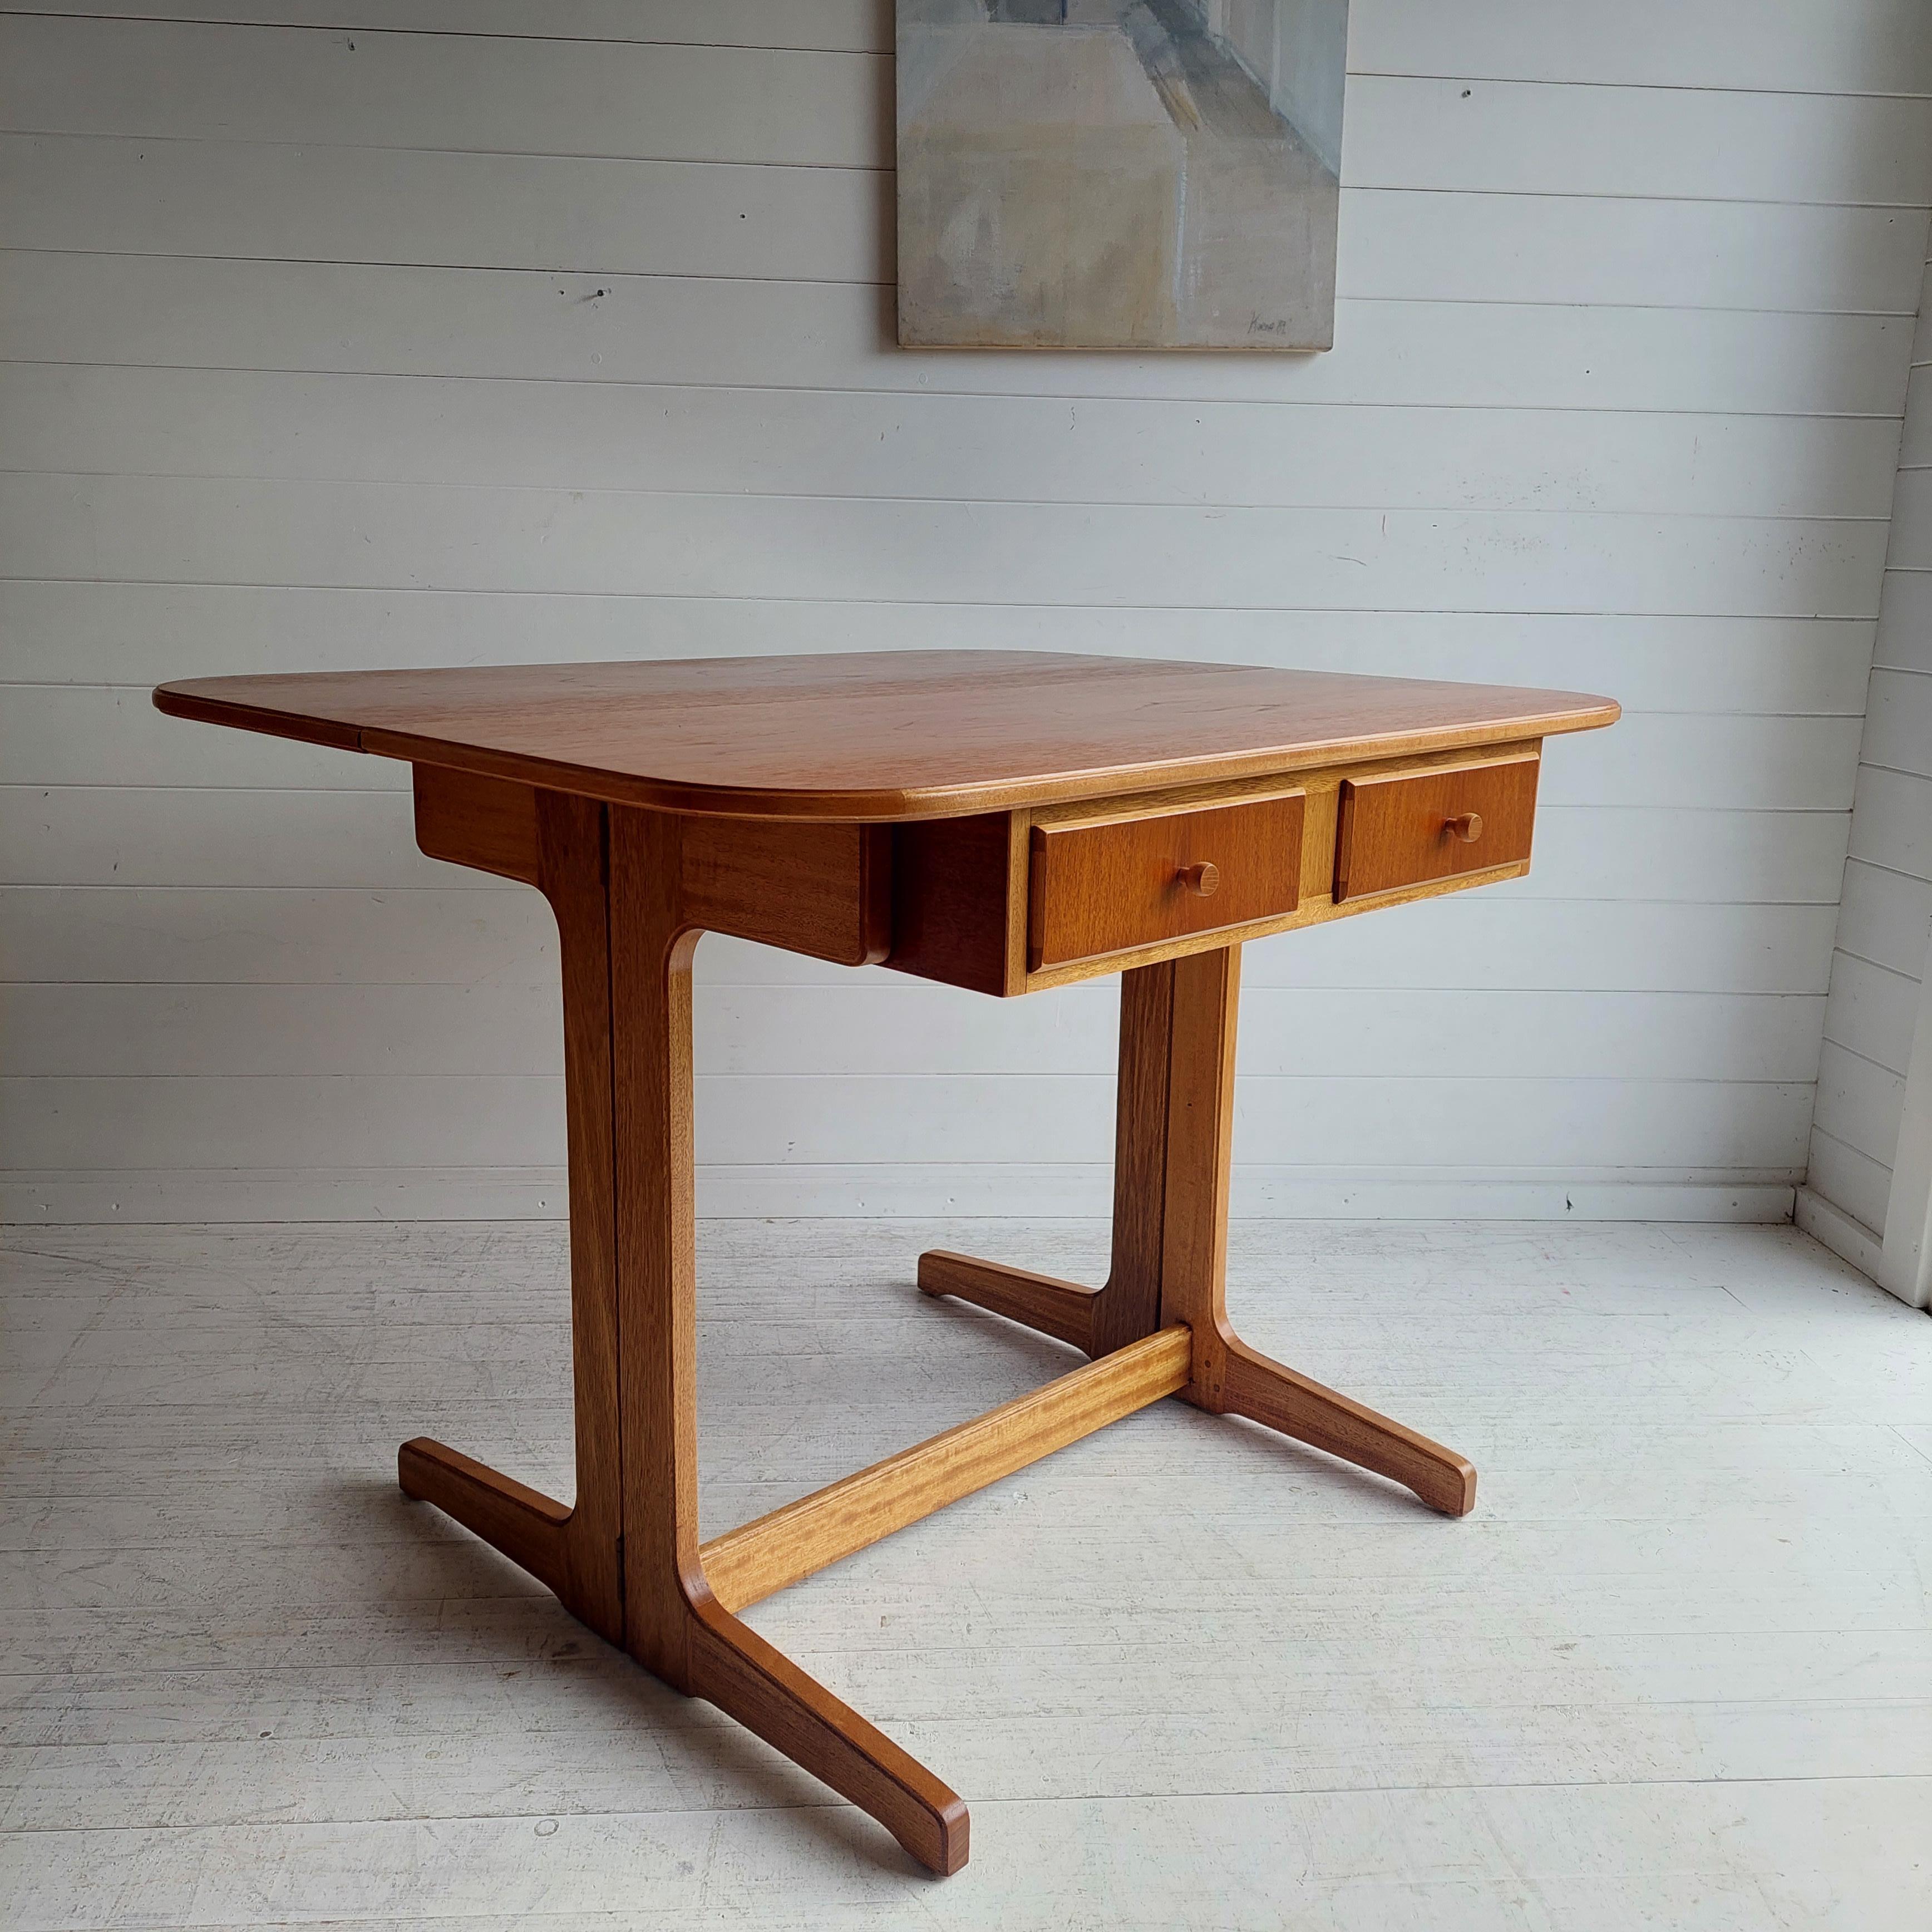 Mid century Restored teak dropleaf writing desk, console or dining table, c1960�’s.
Beautifully constructed from contrasting  teak and oak wood.
Scandinavian design

The desk can be extending quickly and easily by simply lifting the drop leaf and